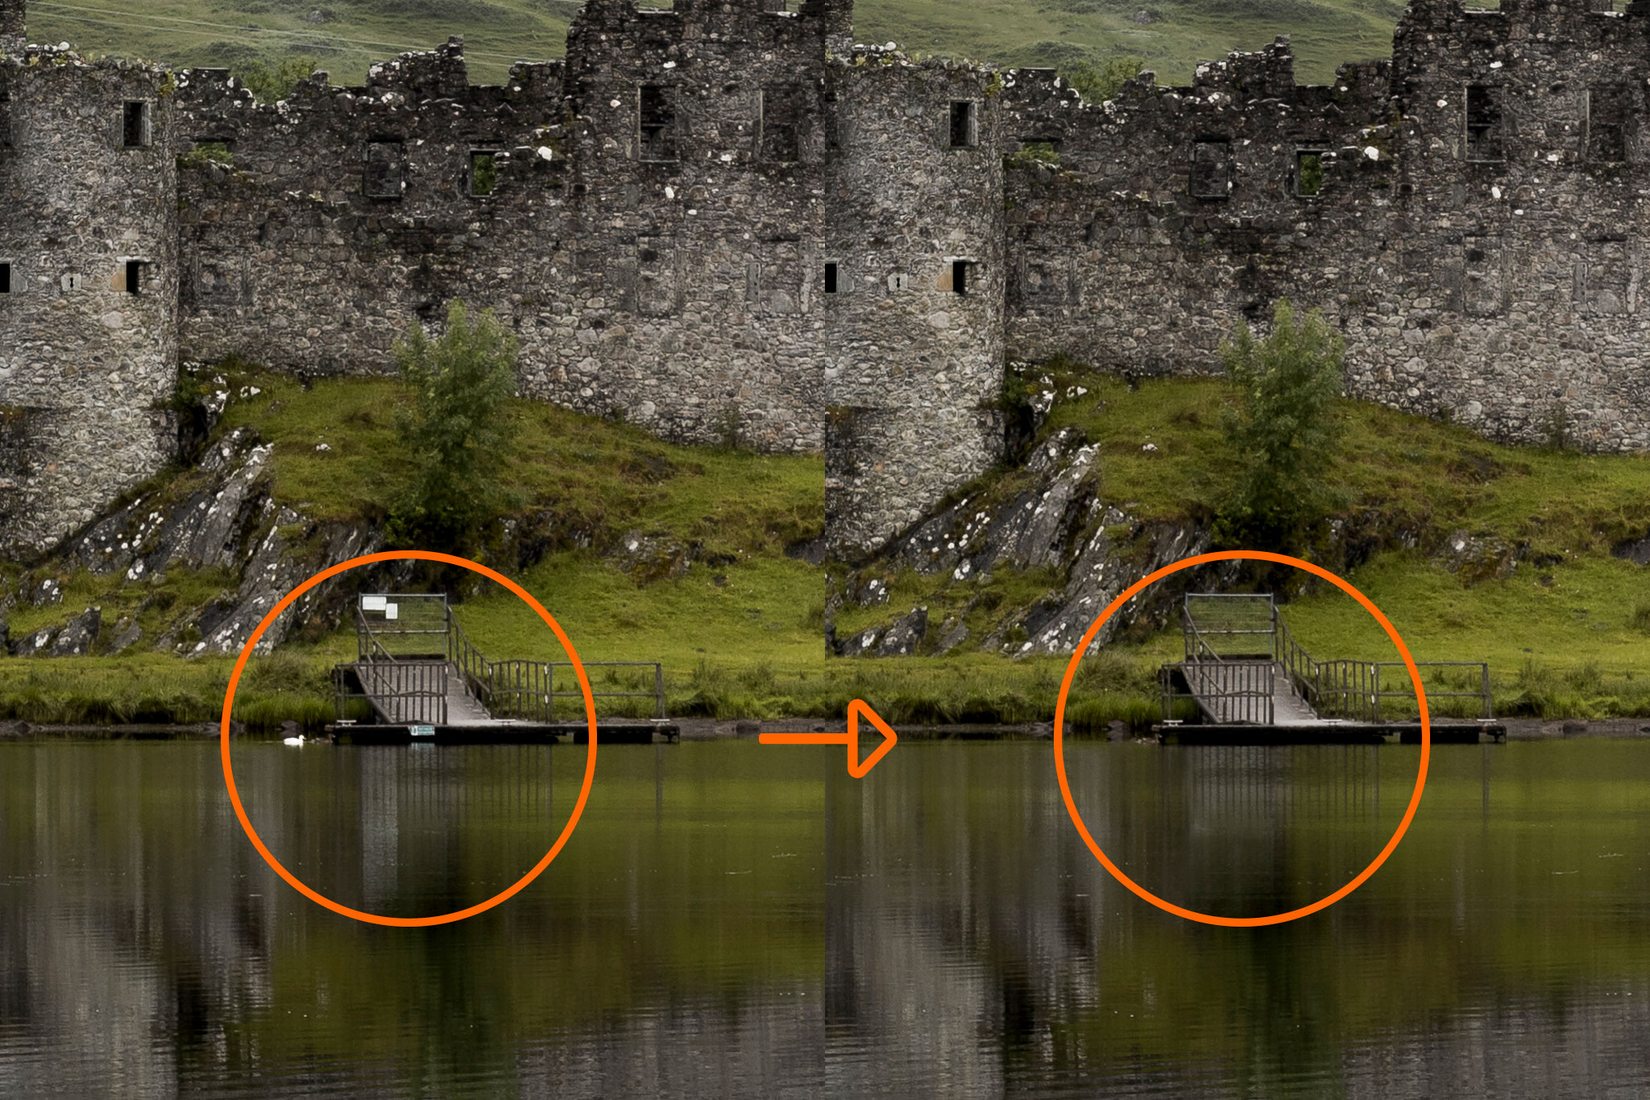 How to clean up your Photo by removing distracting Elements